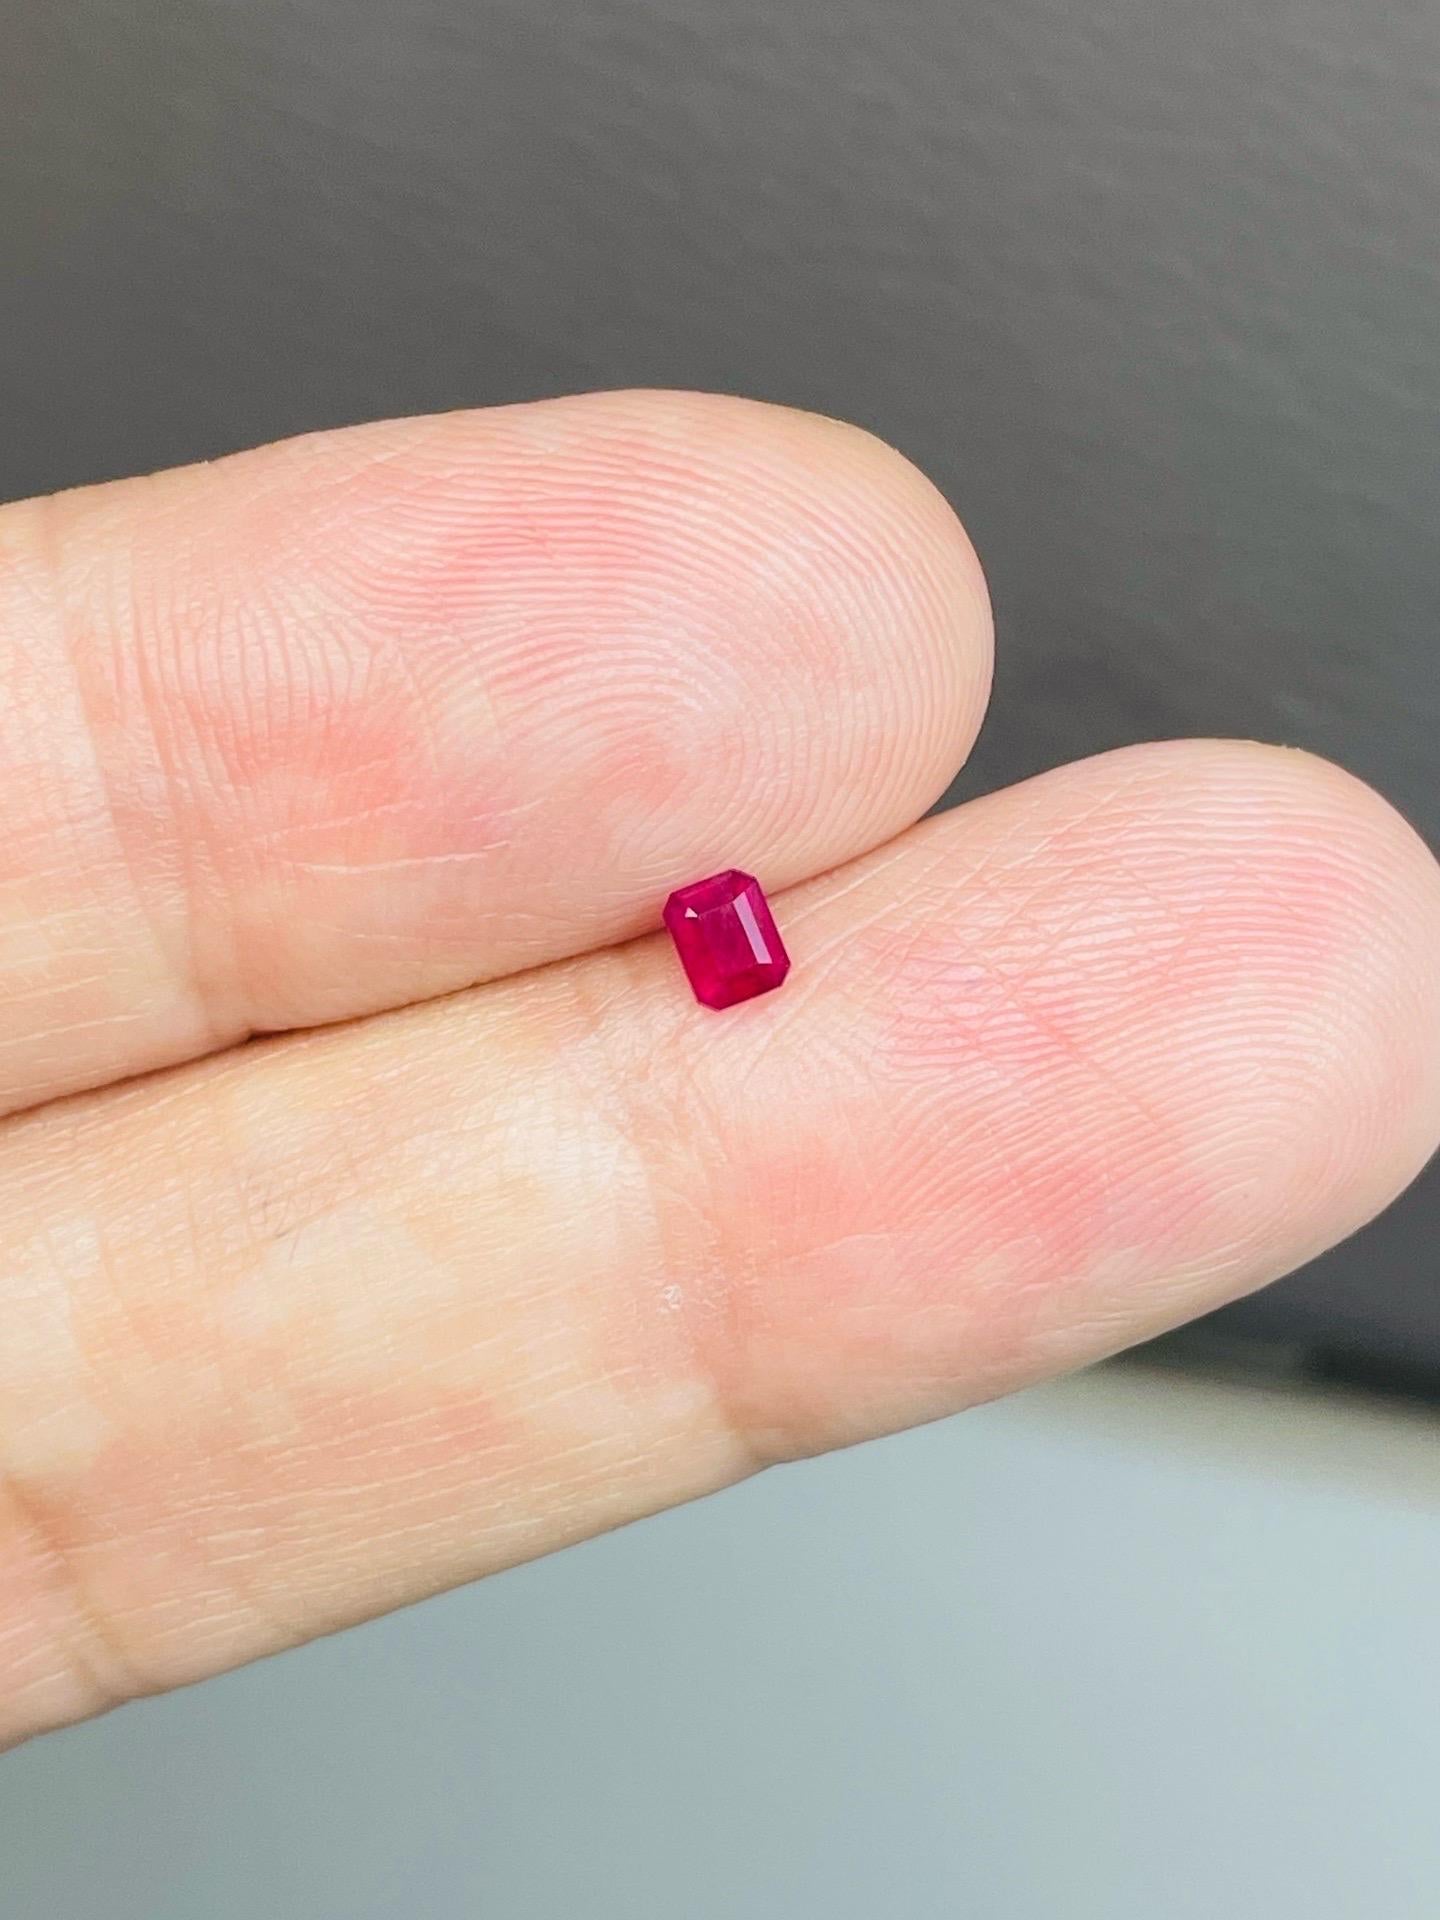 Name: red beryl emerald 
weight: 0.16ct 
size: 3.74*2.98mm
origin: American 
color: red 
clarity: high 
certificate: guild 
Cut: emrald cut 
others:

Red emeralds, also known as red beryl or bixbite, are exceptionally rare gemstones. They are even